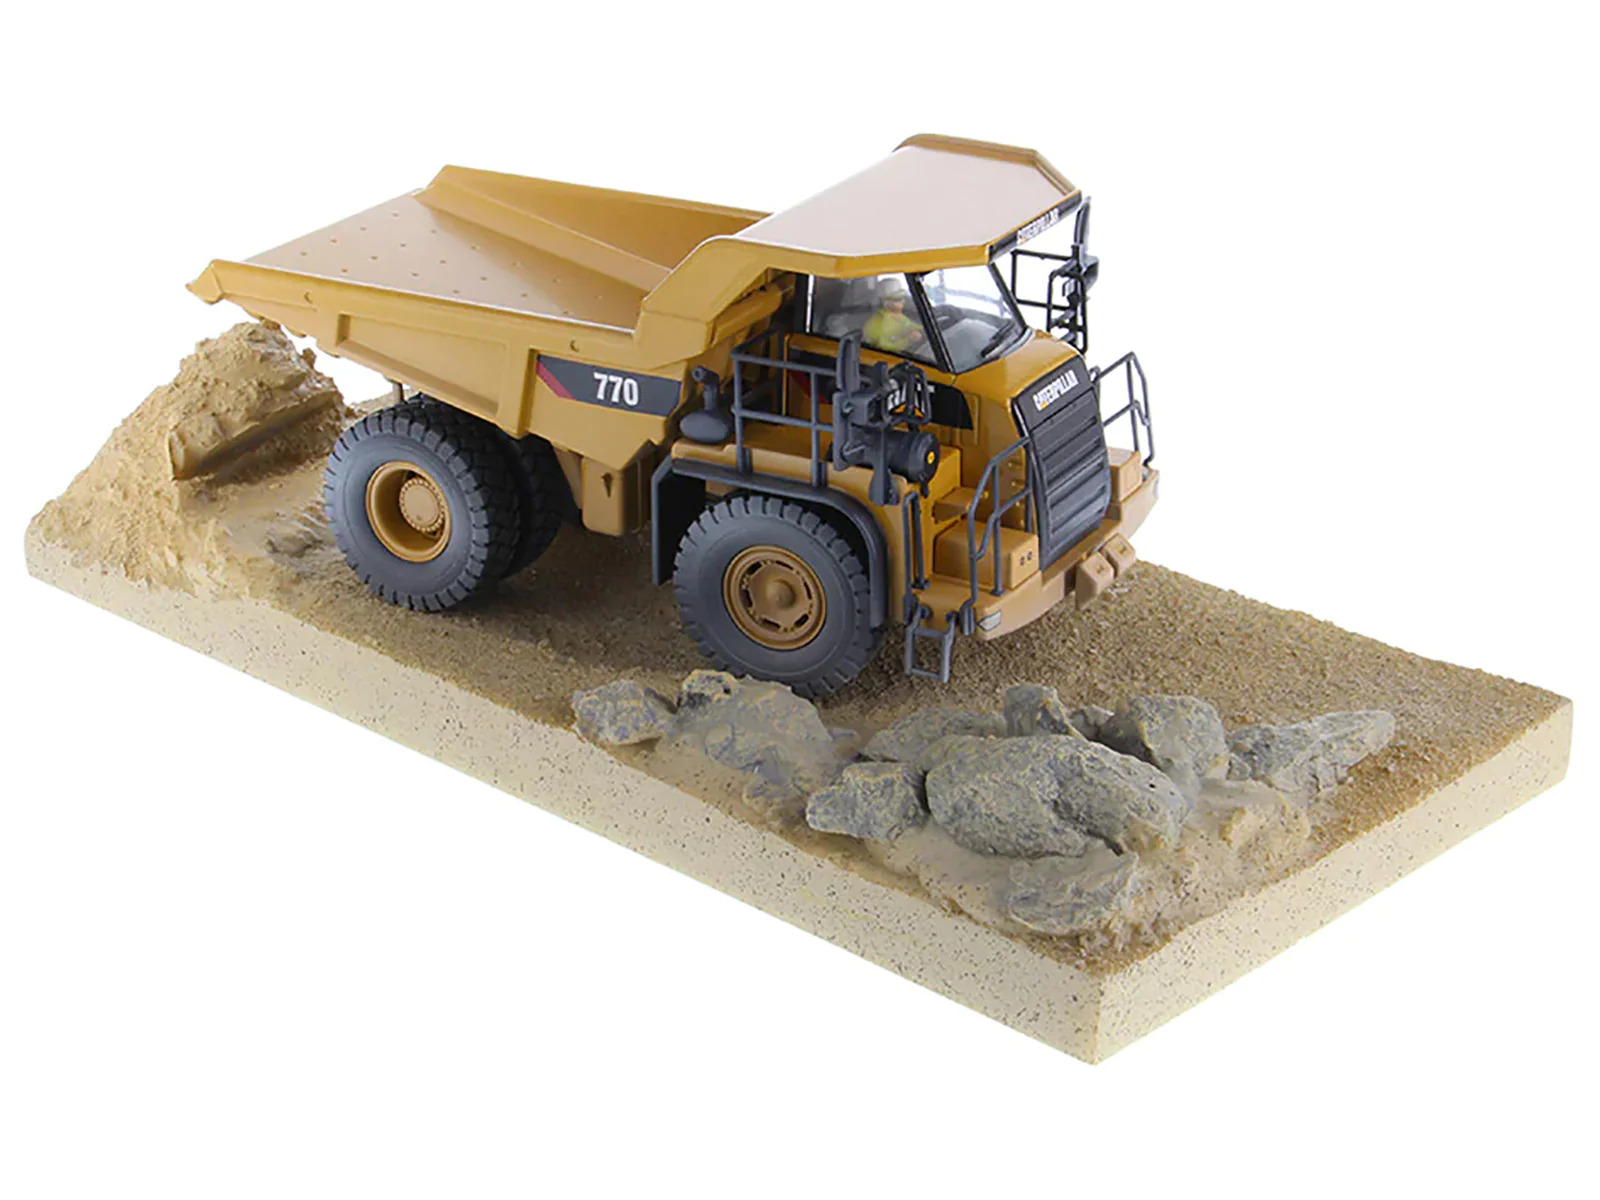 CAT 770 Off-Highway Truck Weathered with Operator Series 1/50 Diecast Model